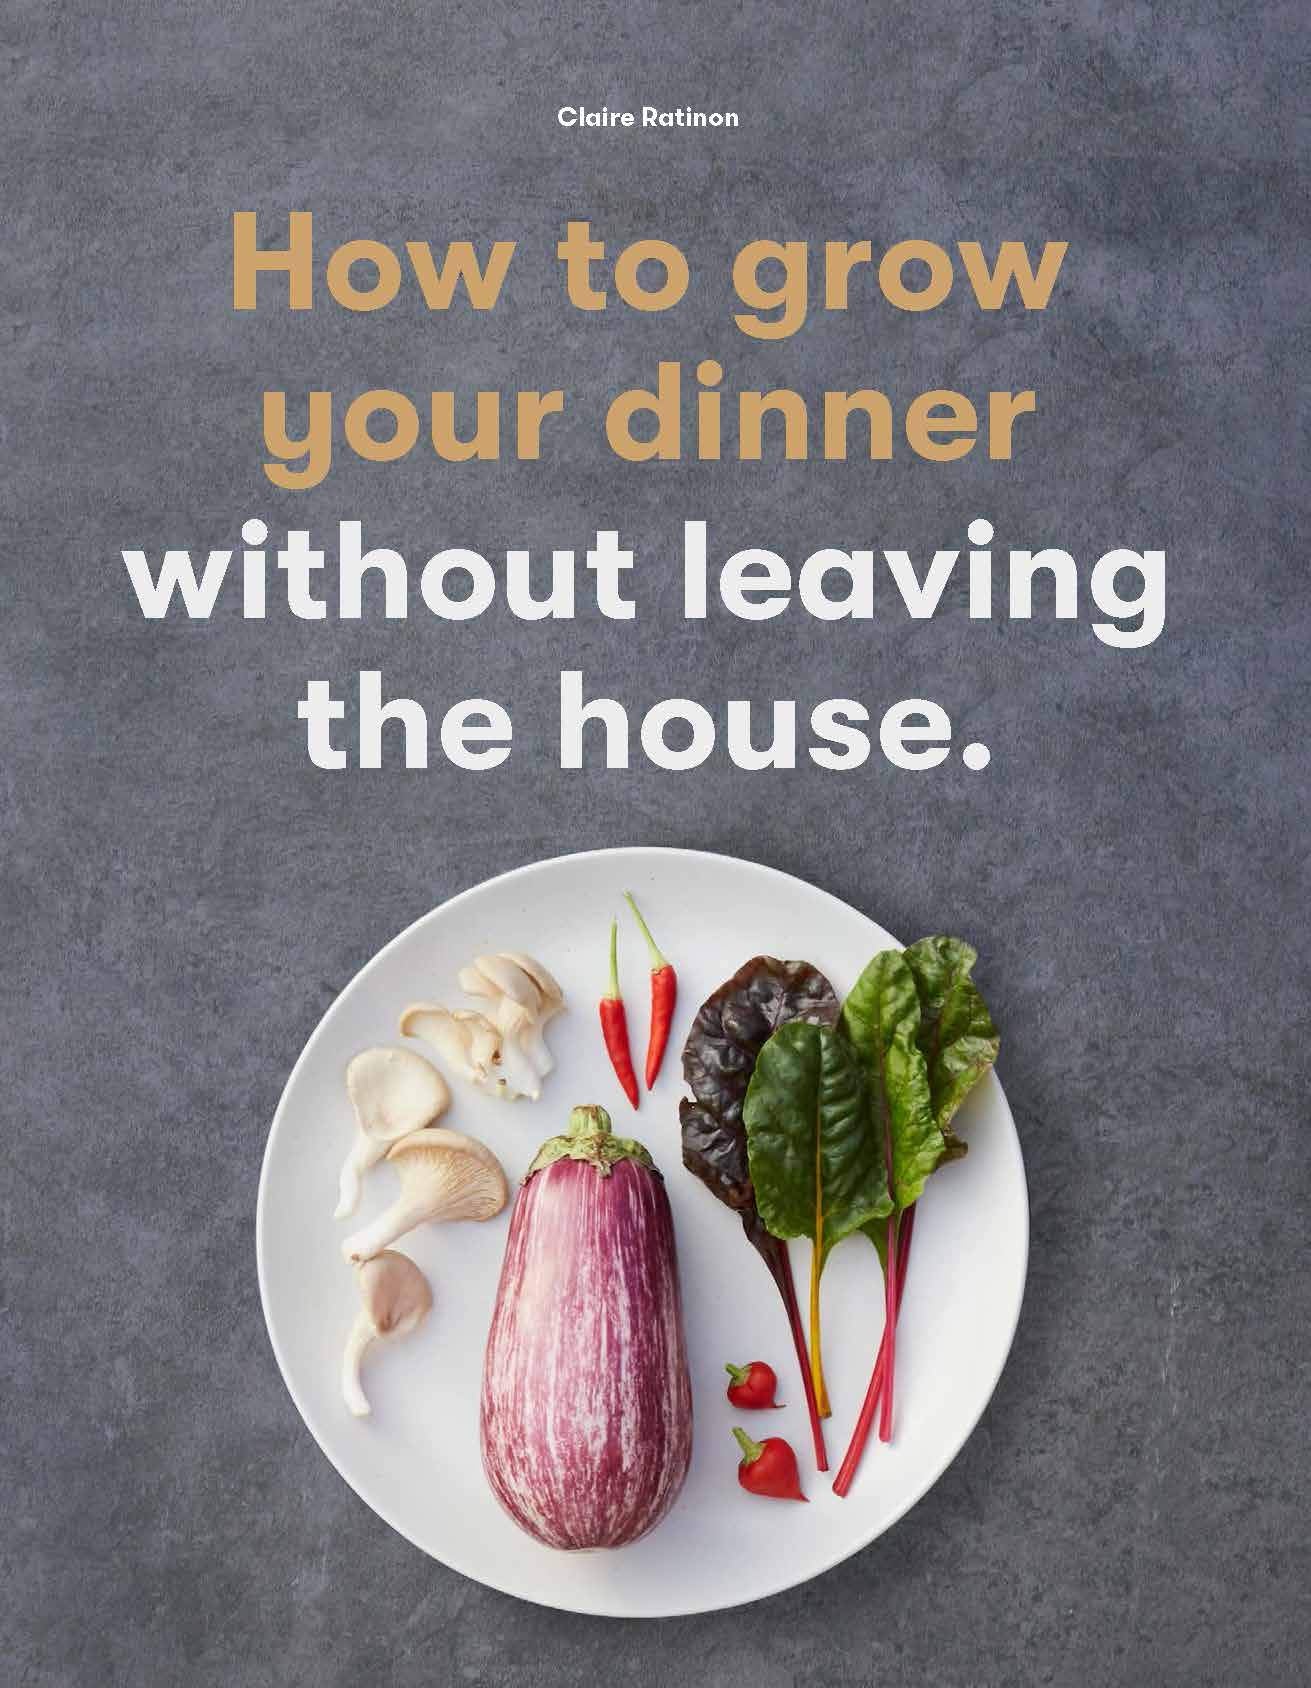 How to Grow Your Dinner: Without Leaving the House (Claire Ratinon)